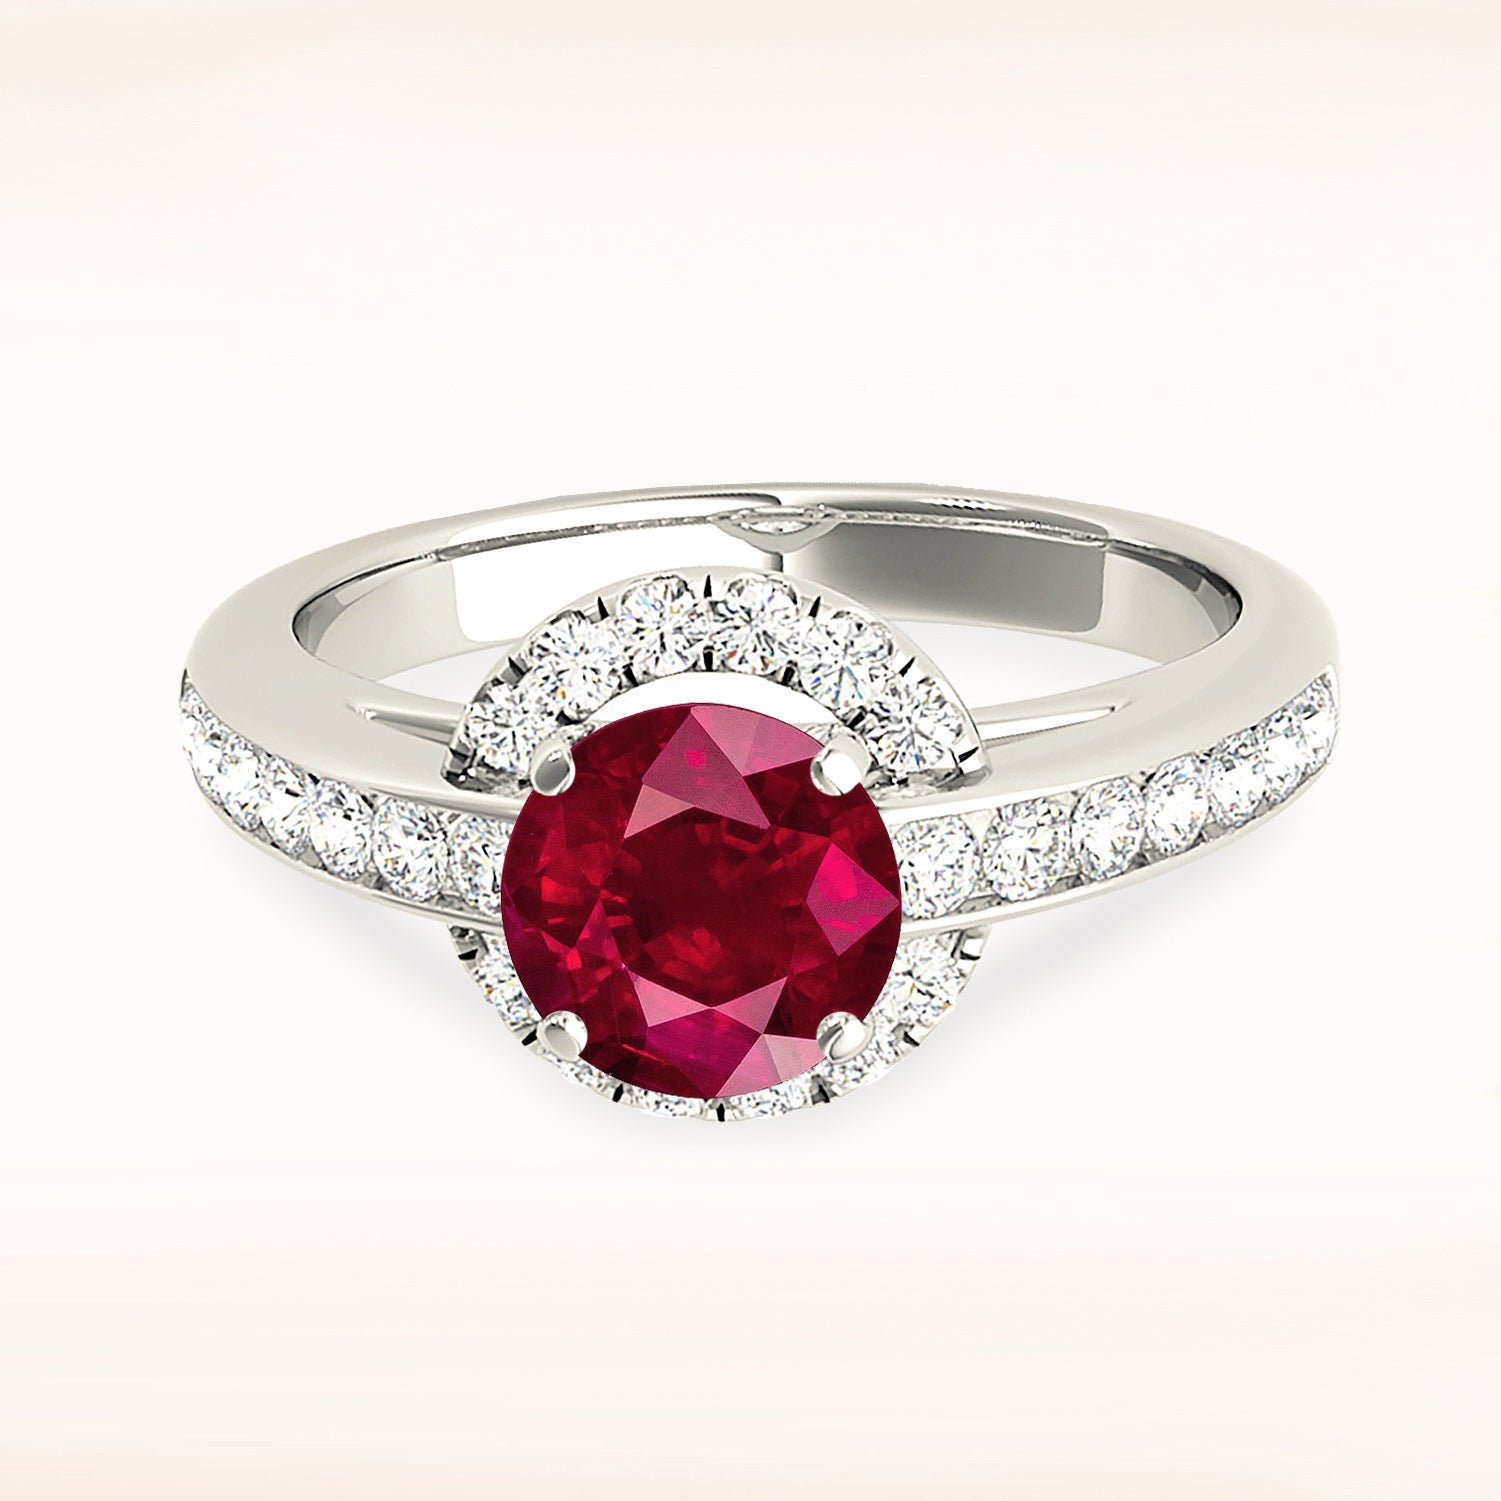 1.79 ct. Genuine Ruby Ring With 0.40 ctw. Diamond Underneath Halo And Thin Diamond Band-in 14K/18K White, Yellow, Rose Gold and Platinum - Christmas Jewelry Gift -VIRABYANI